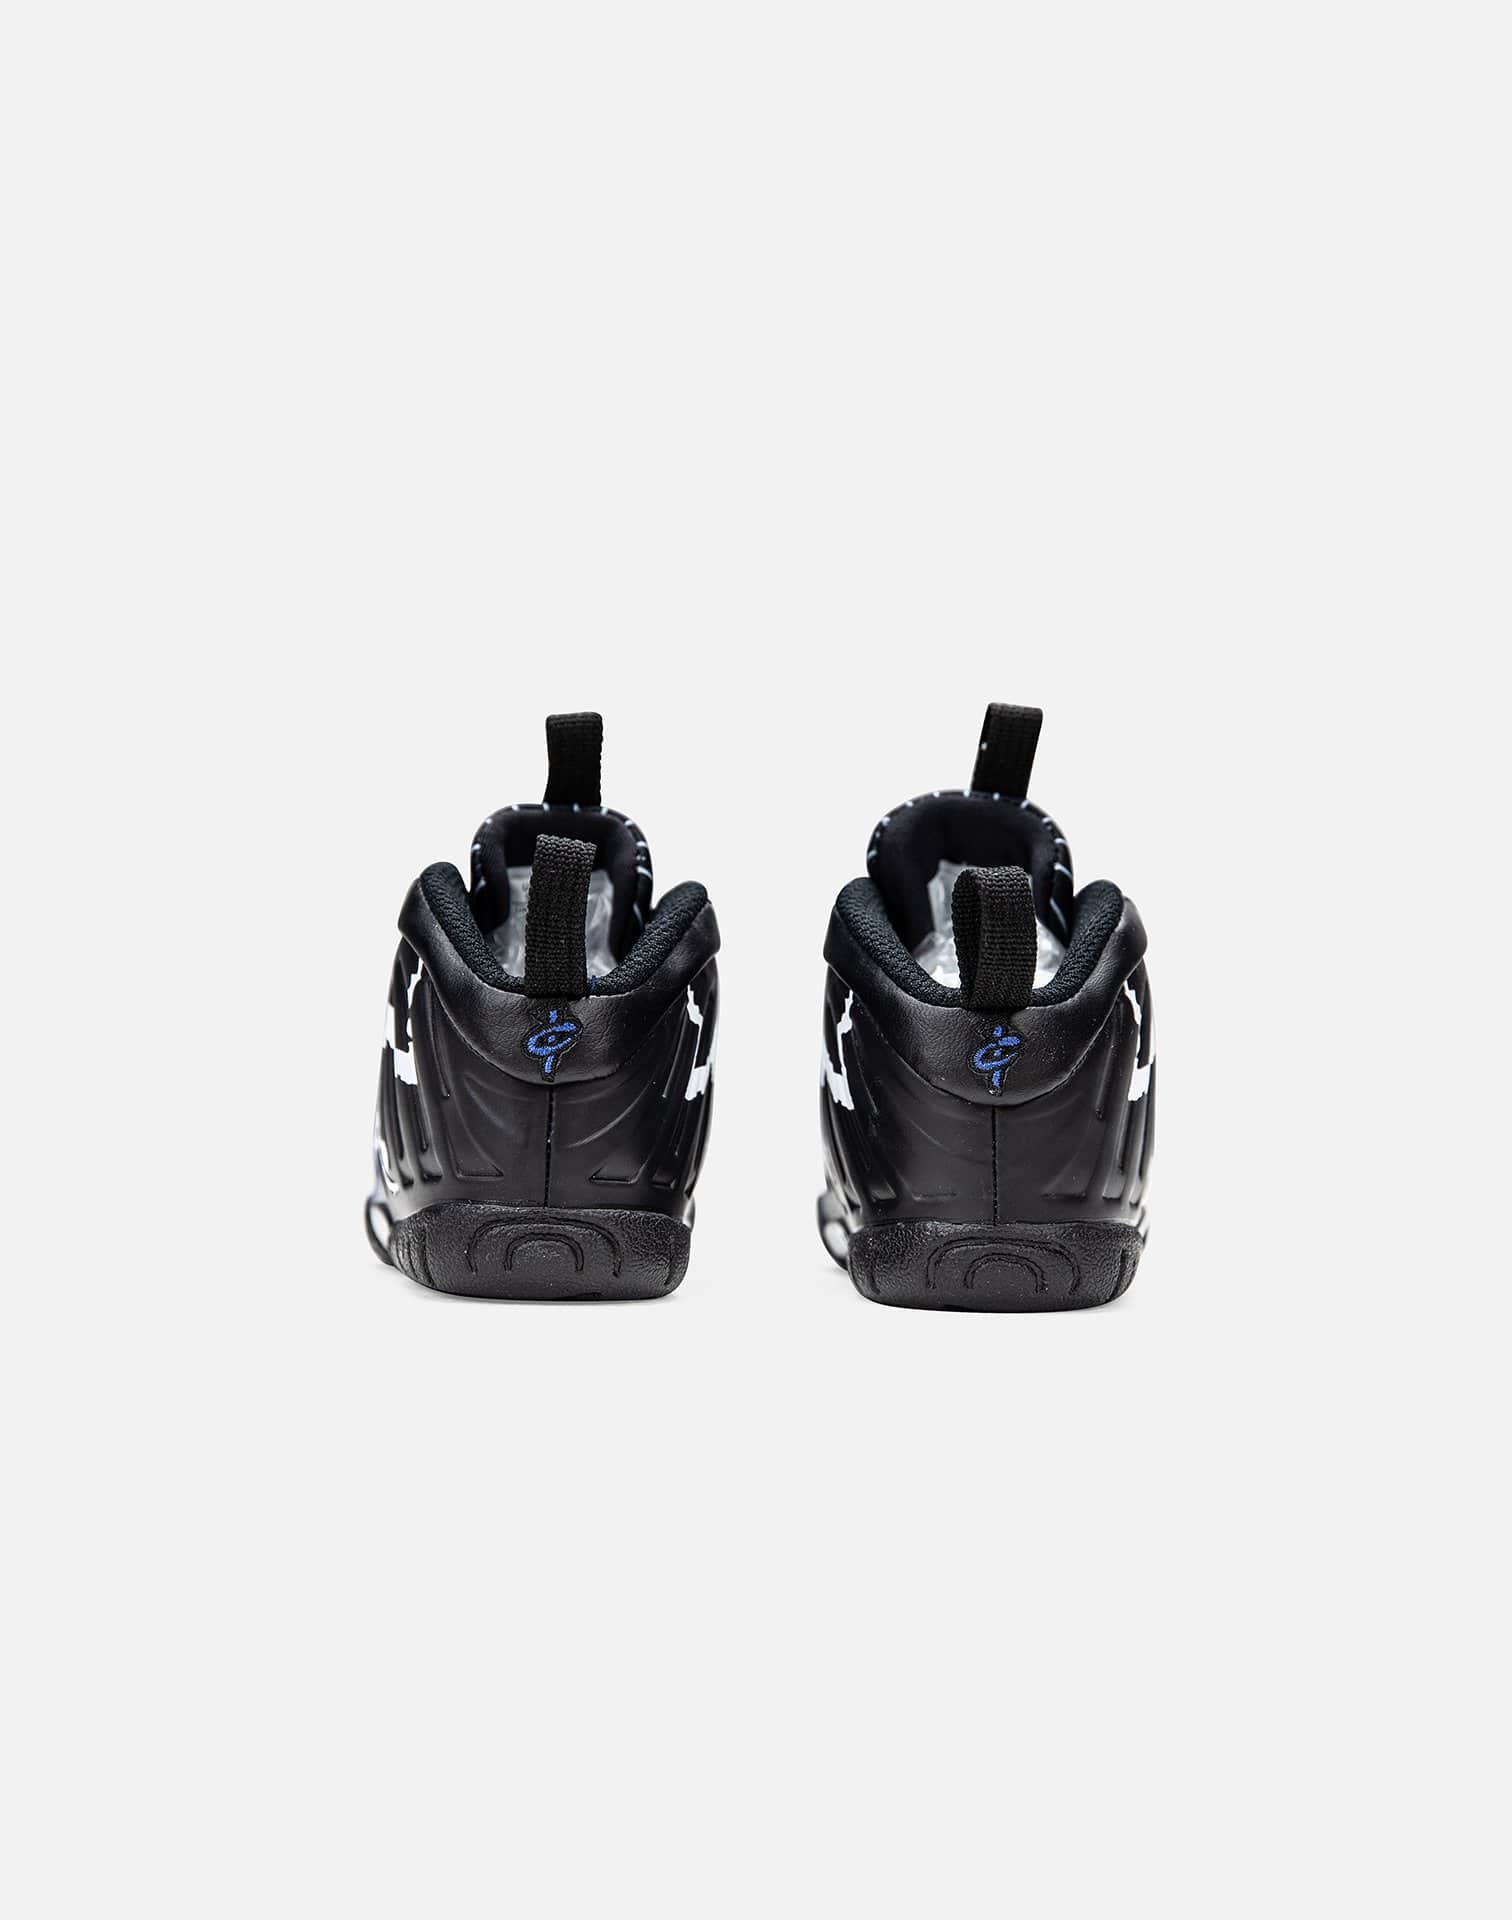 Nike LIL' POSITE ONE INFANT